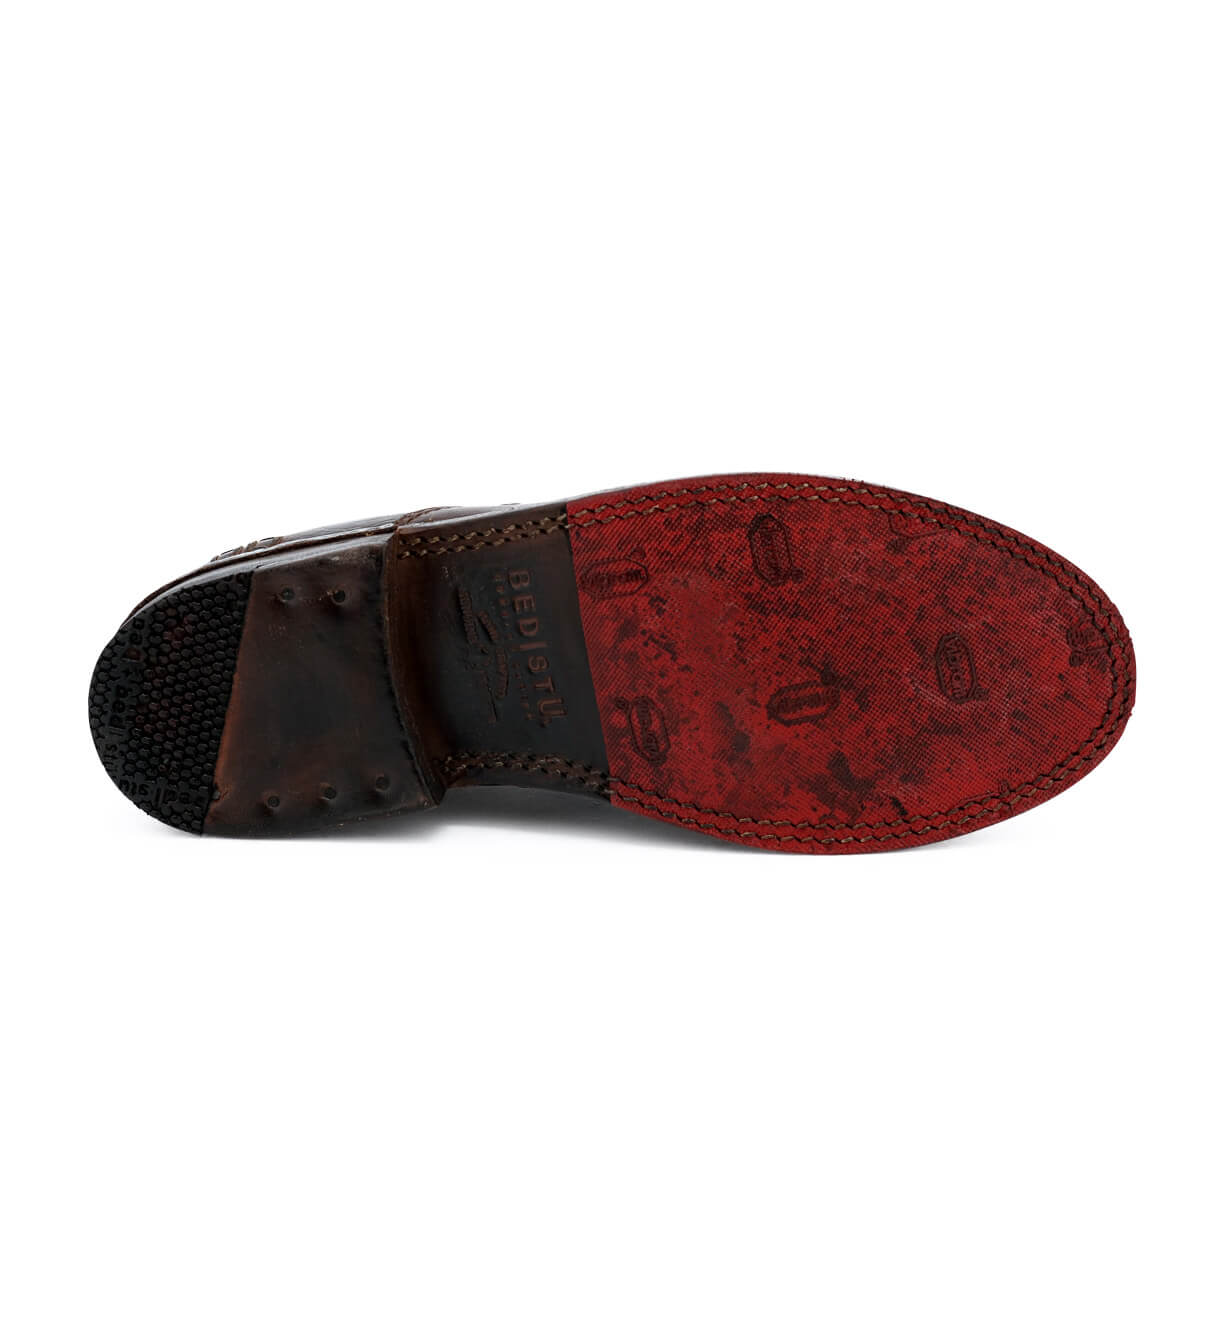 A pair of Bed Stu men's shoes with a red sole.